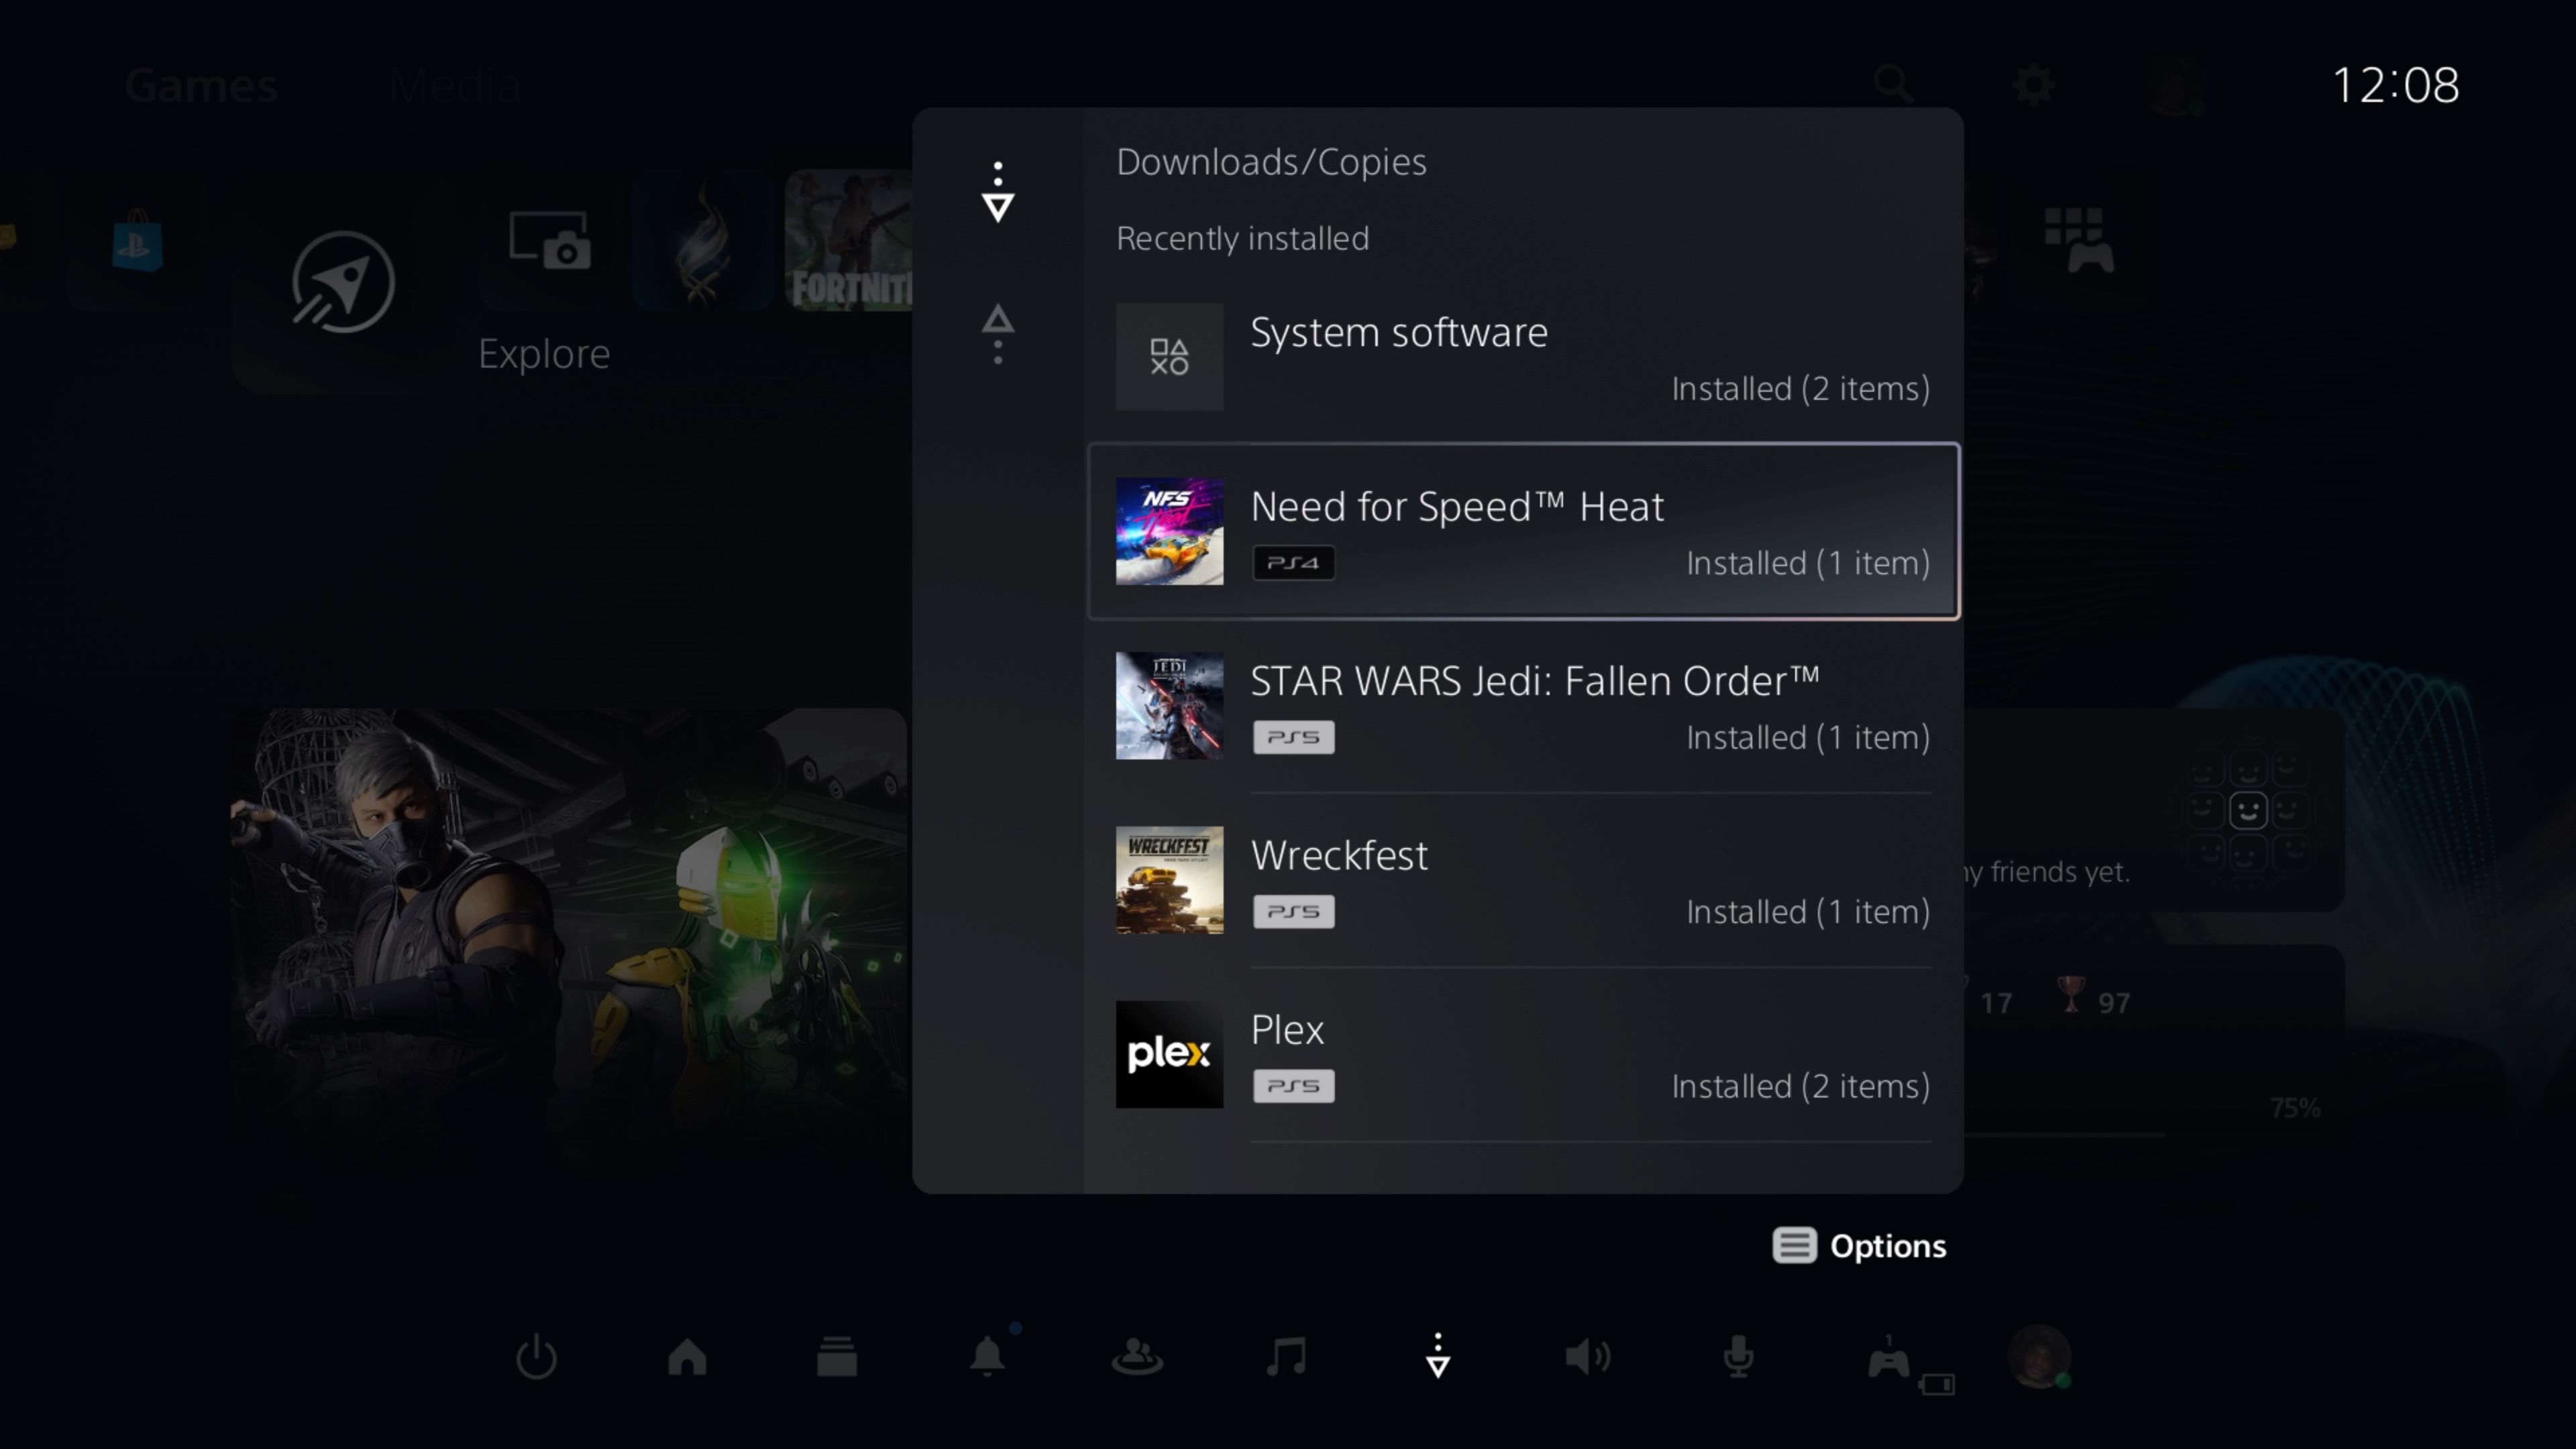 PS5 downoad and update window